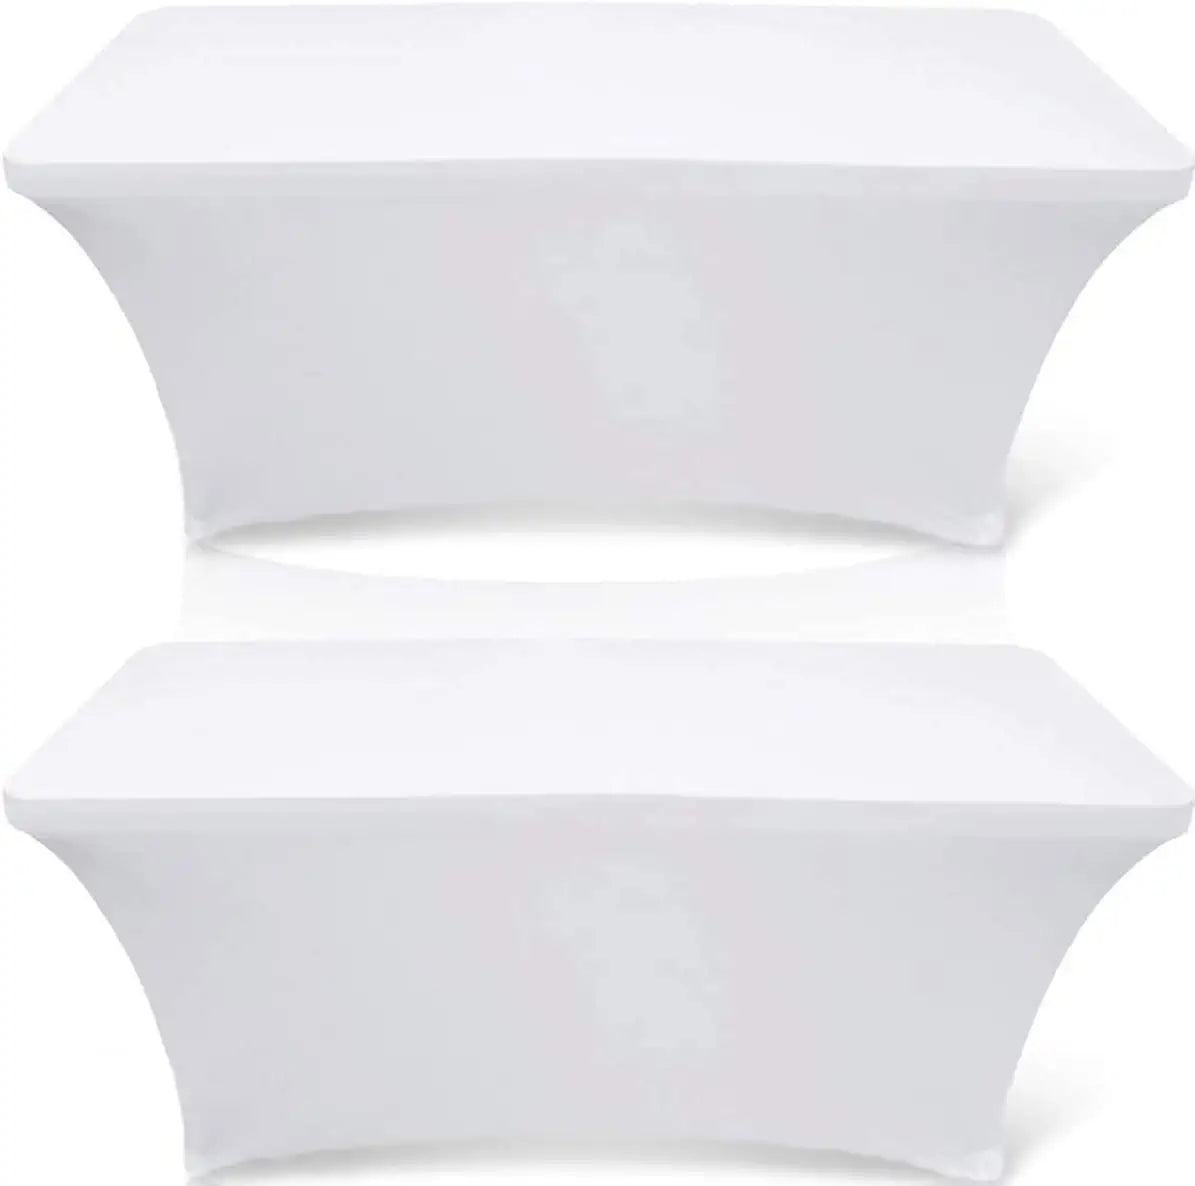 Wealuxe Rectangle Spandex Stretchable Tablecloths | 2 Pack